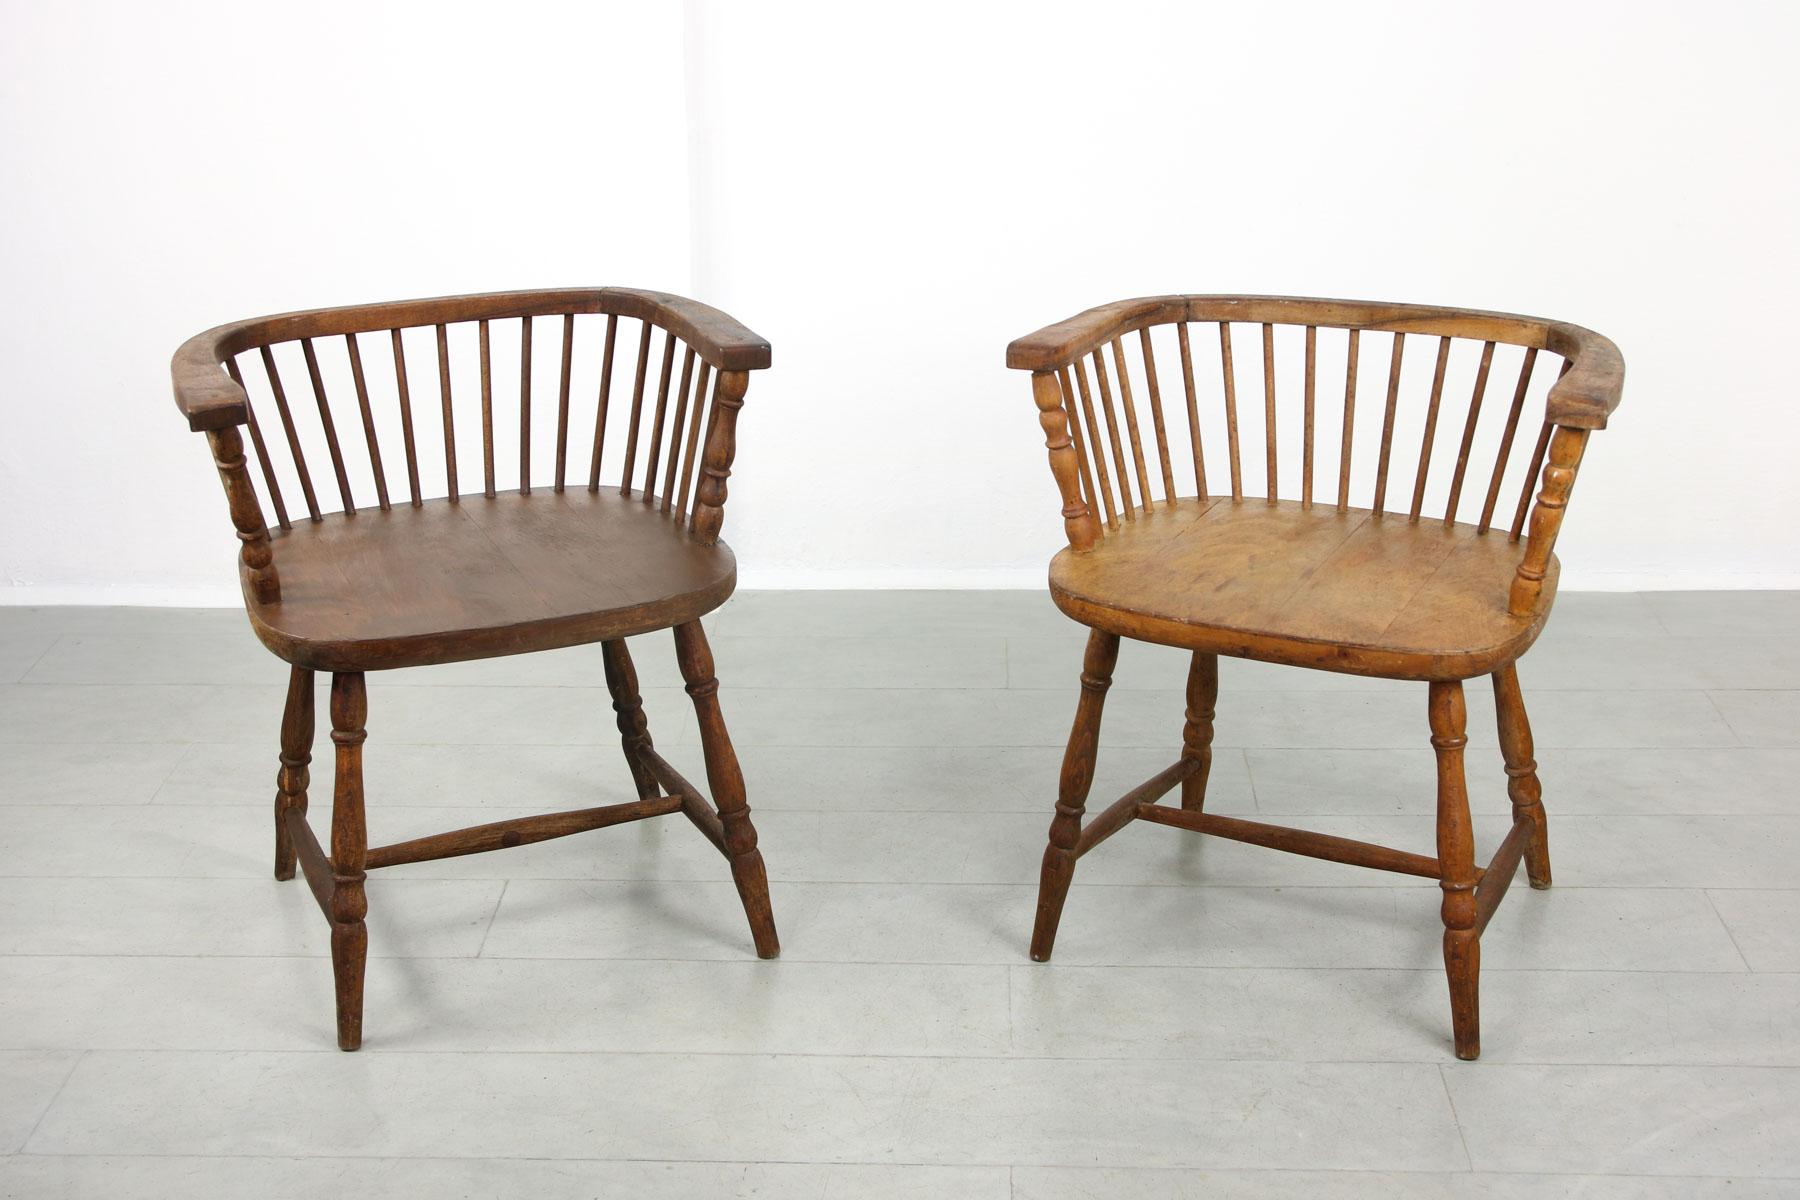 Rare low back Windsor chairs from the 19th century found as props in an old theatre. Identical model, one chair comes in a lighter and other in a darker shade (walnut wood). Seat height: 45cm. Good overall vintage condition. Packed with love and